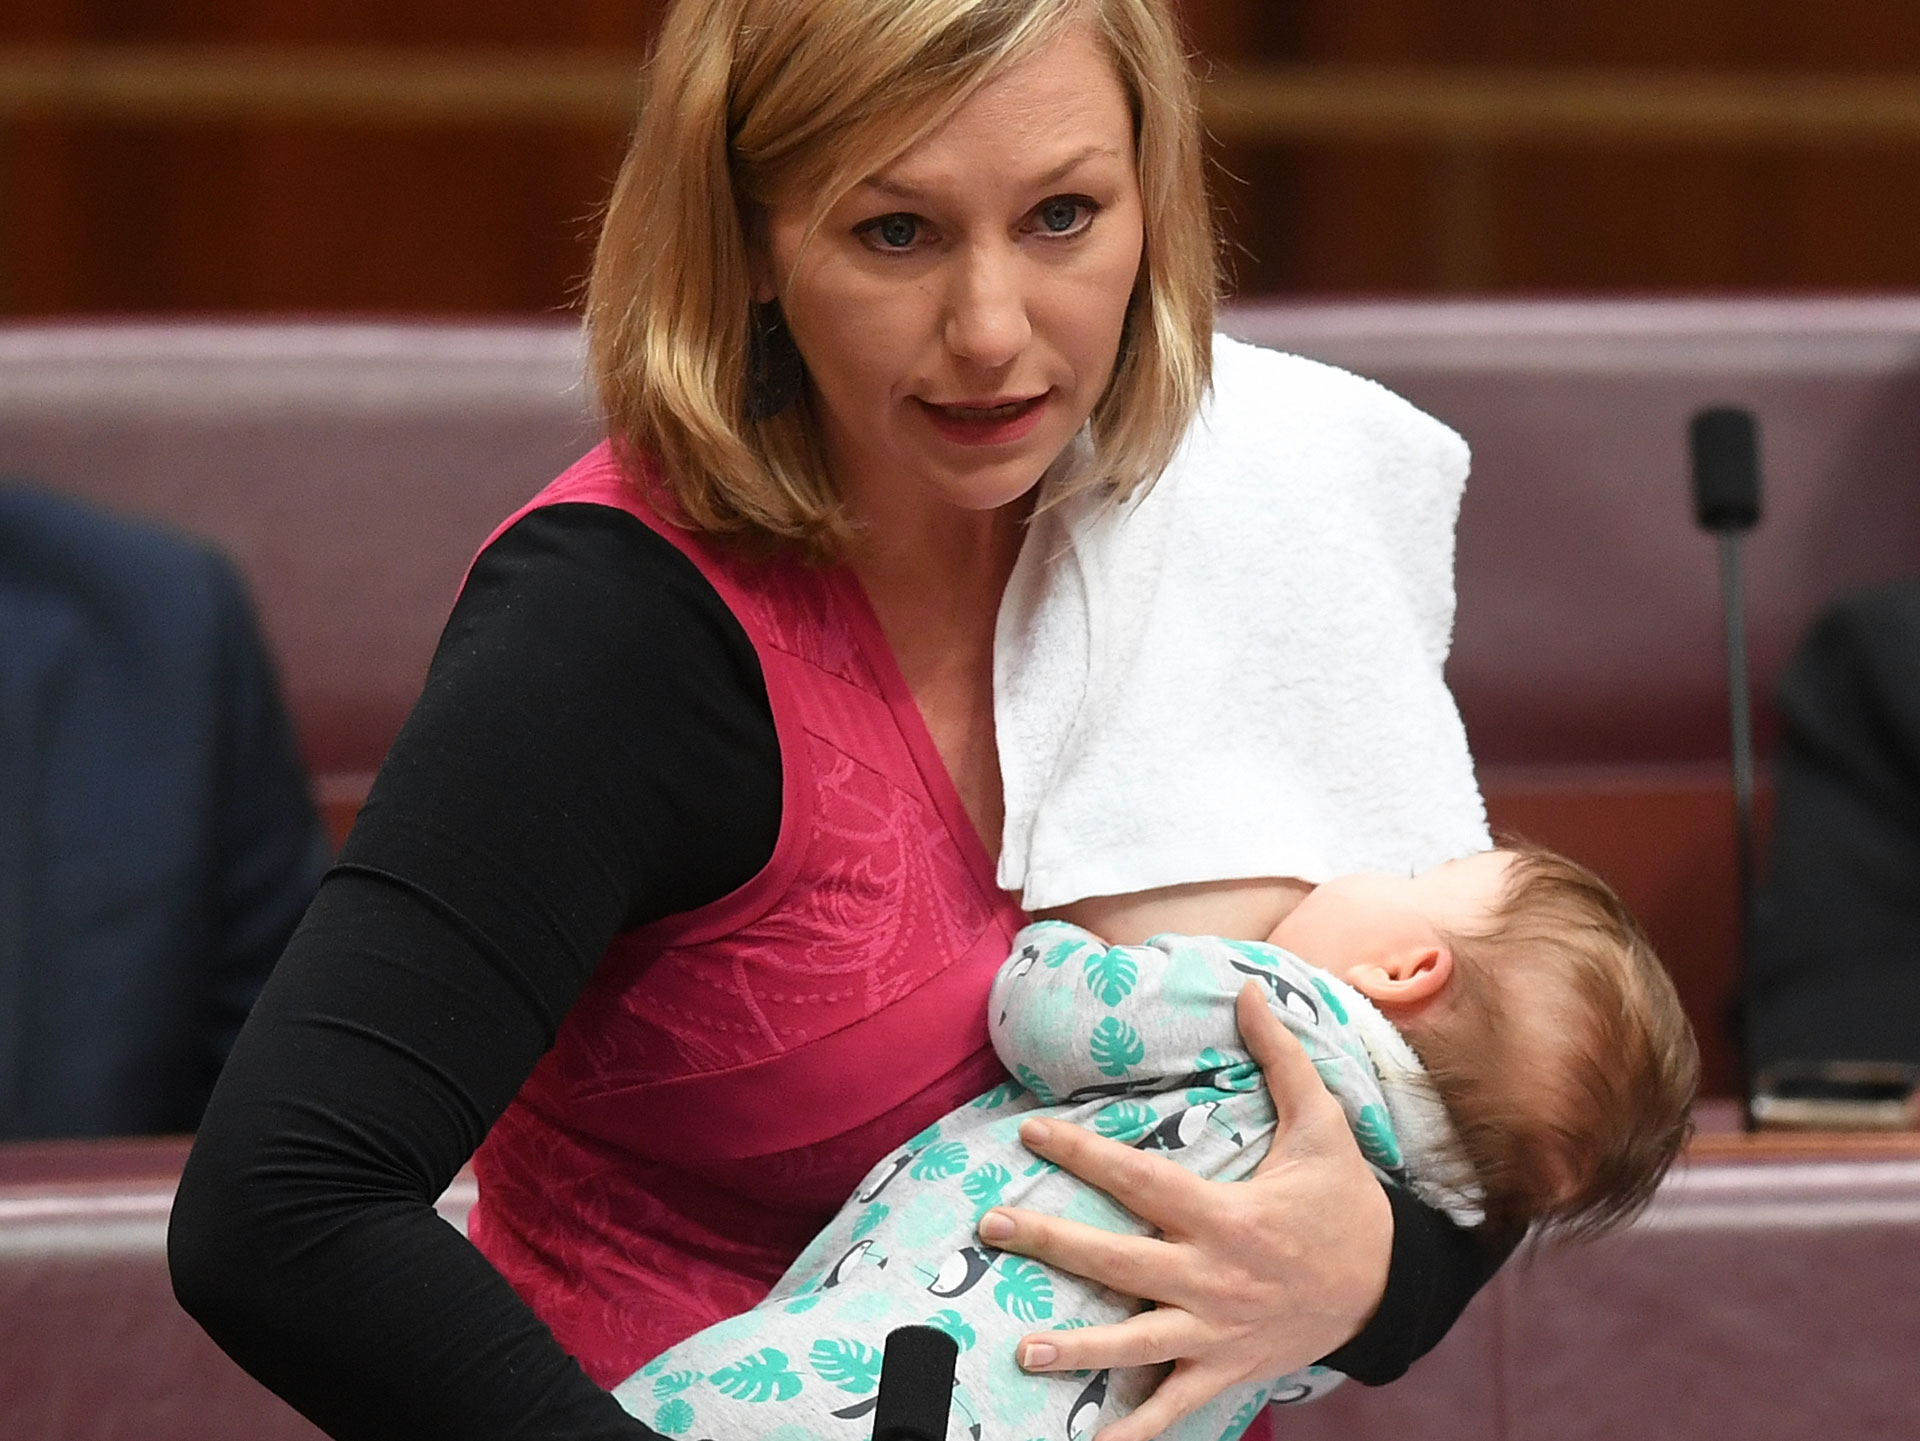 Larissa Waters cops online abuse for breastfeeding in the senate